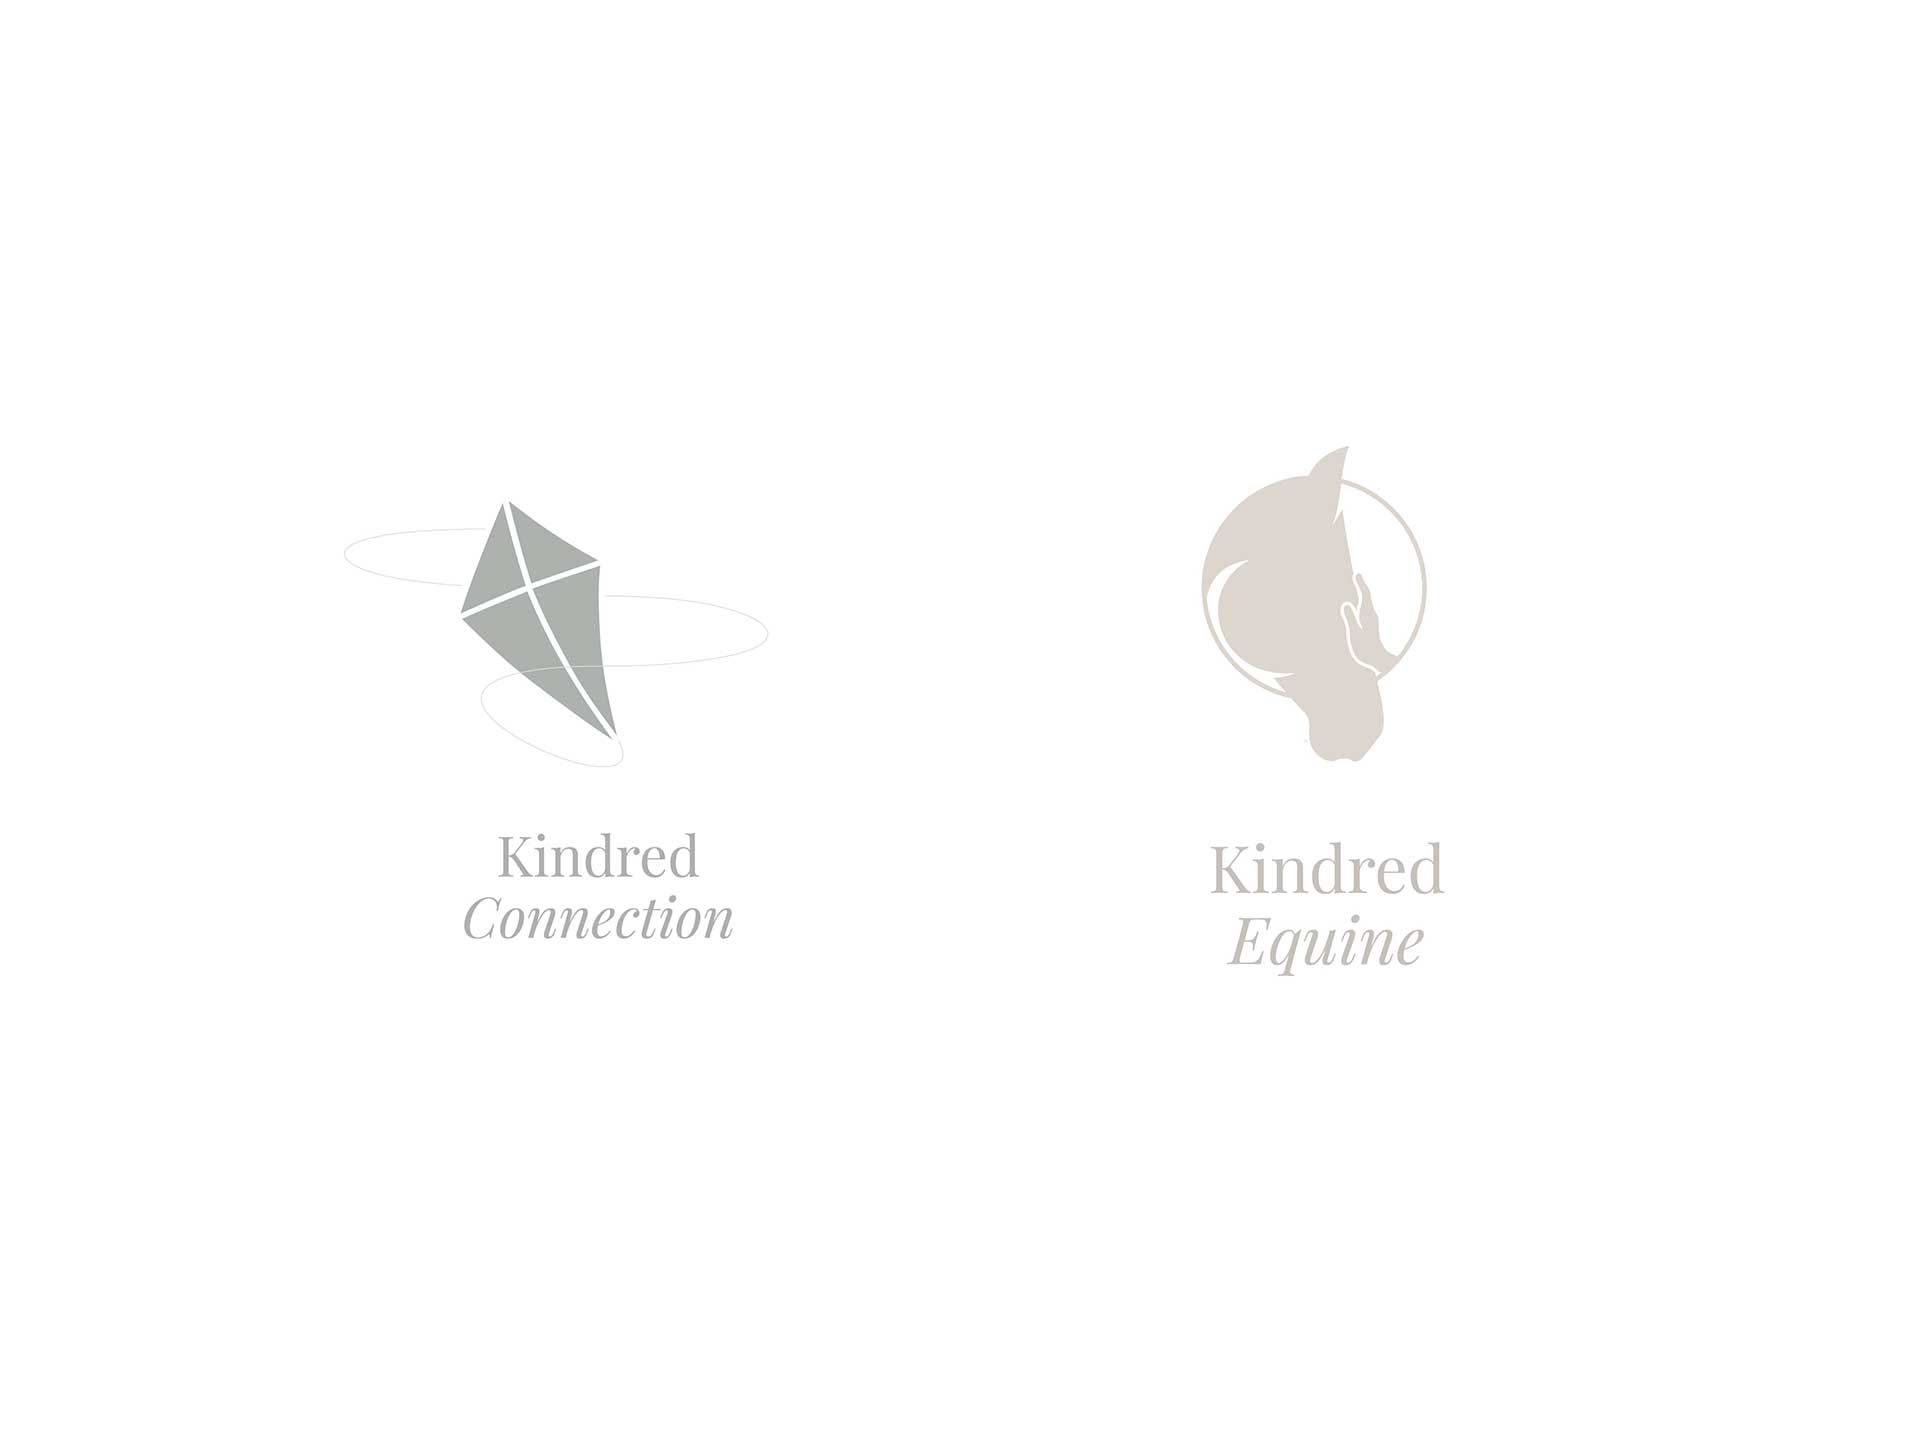 Kindred Family connection and equine icons - White Canvas Design